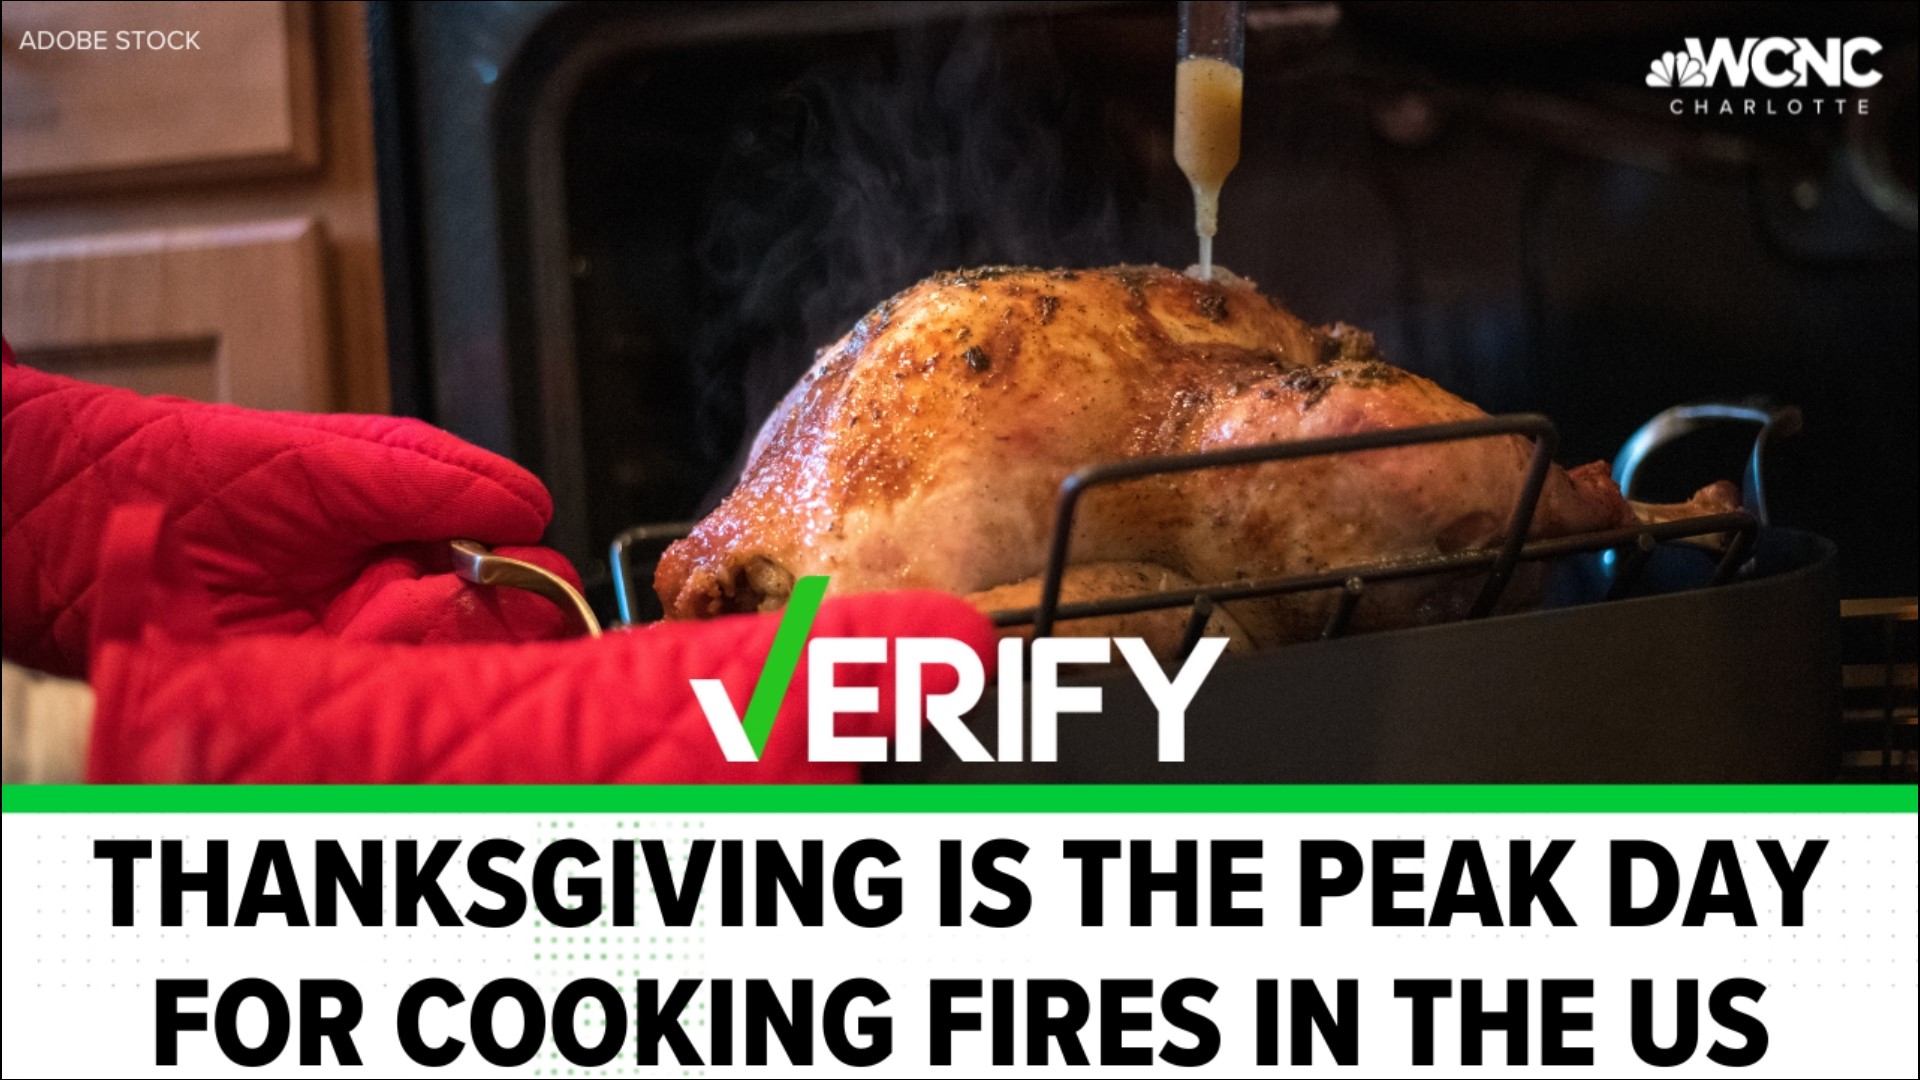 Thanksgiving is, of course, all about giving thanks. But it's also about getting that turkey cooked for your family.